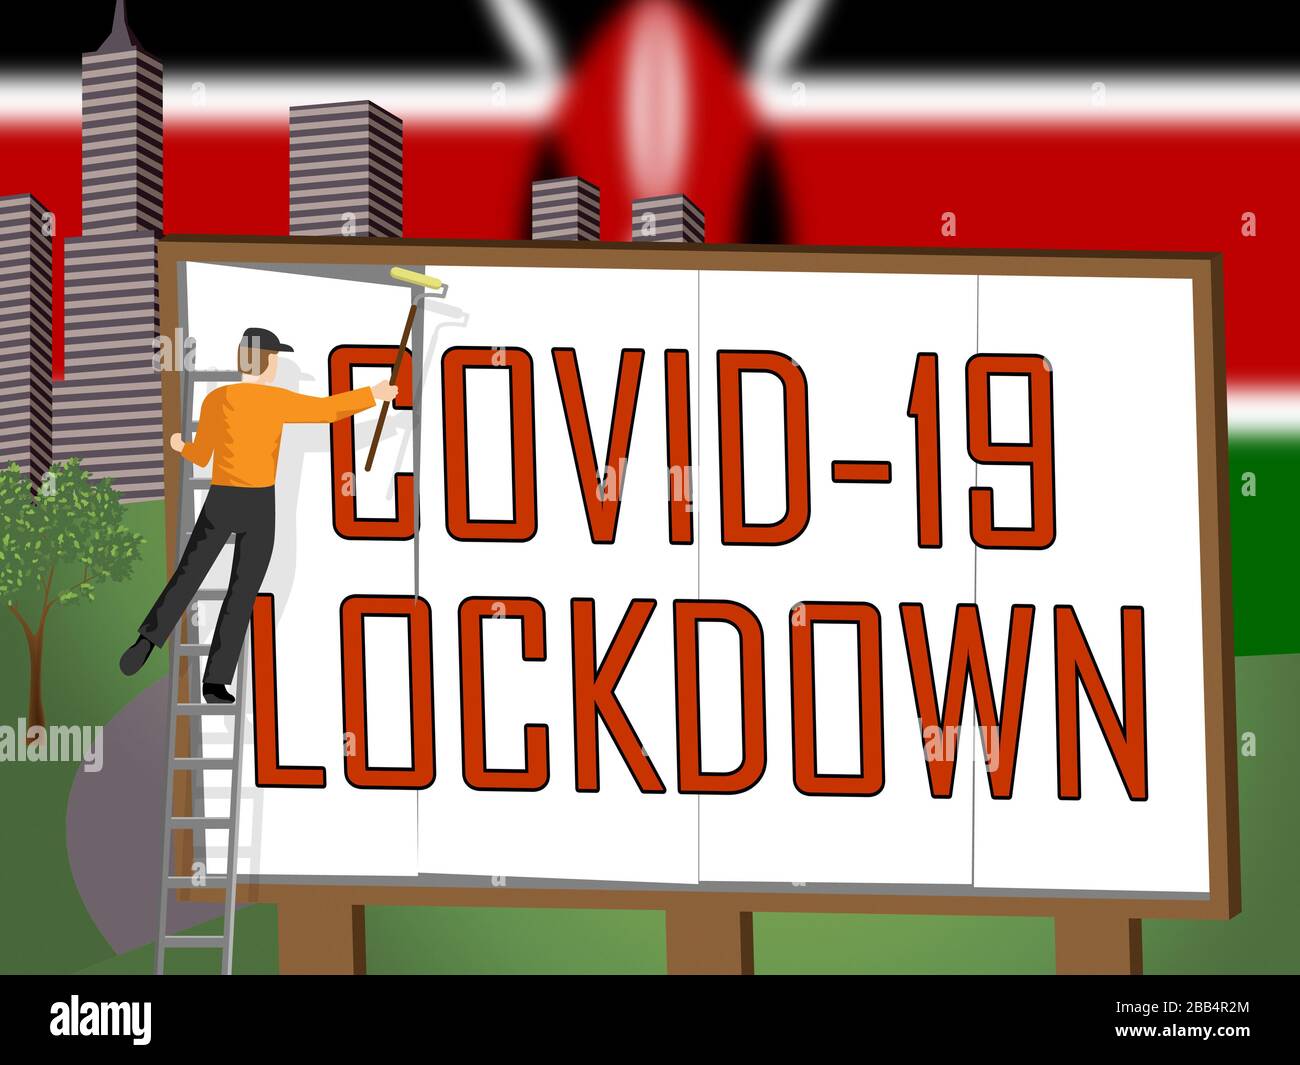 Kenya lockdown sign against coronavirus covid-19. Kenyan stay home order to enforce self isolation and stop infection - 3d Illustration Stock Photo